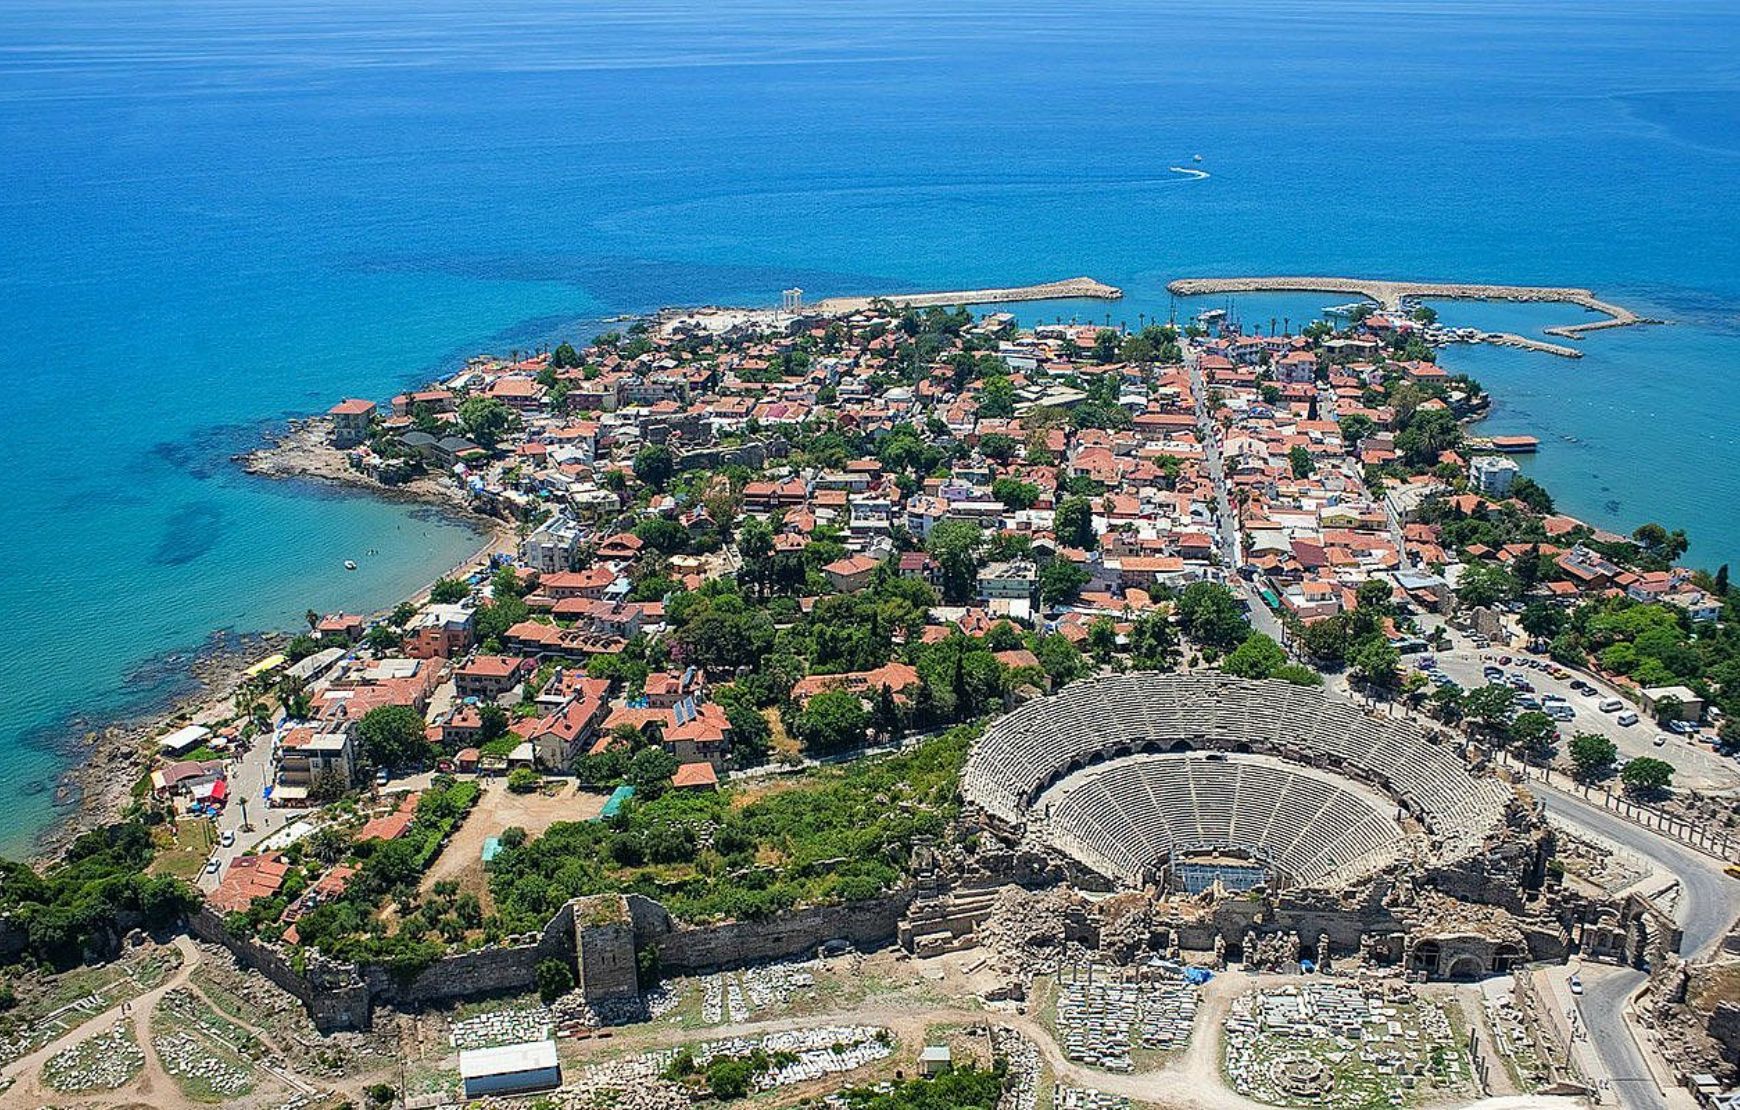 Visit Side in our Antalya Private Tour Package!